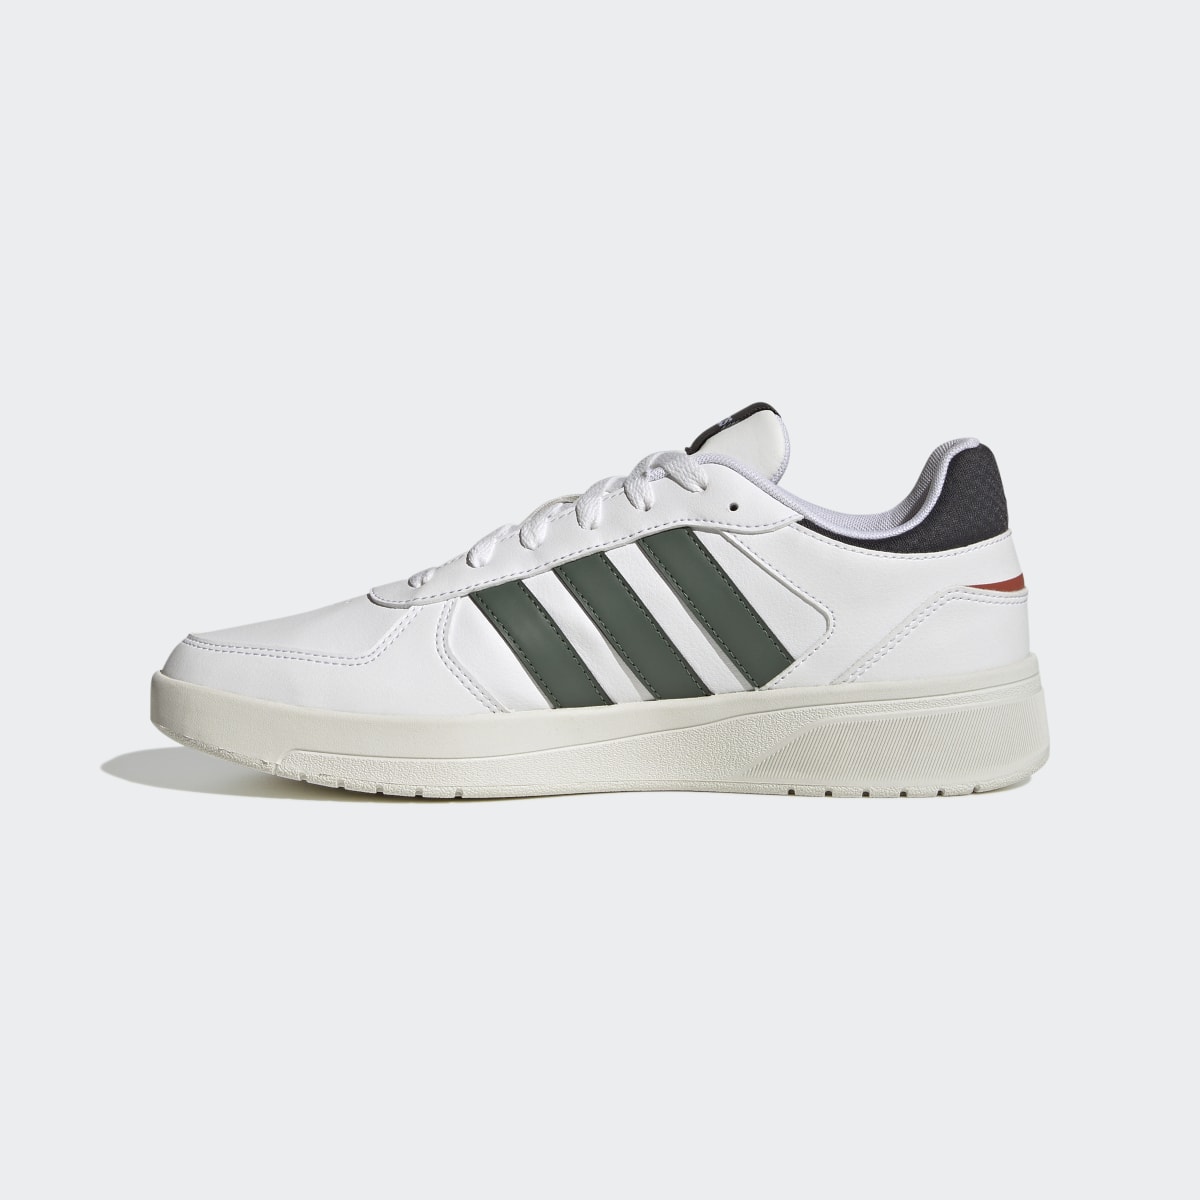 Adidas Chaussure CourtBeat Court Lifestyle. 7